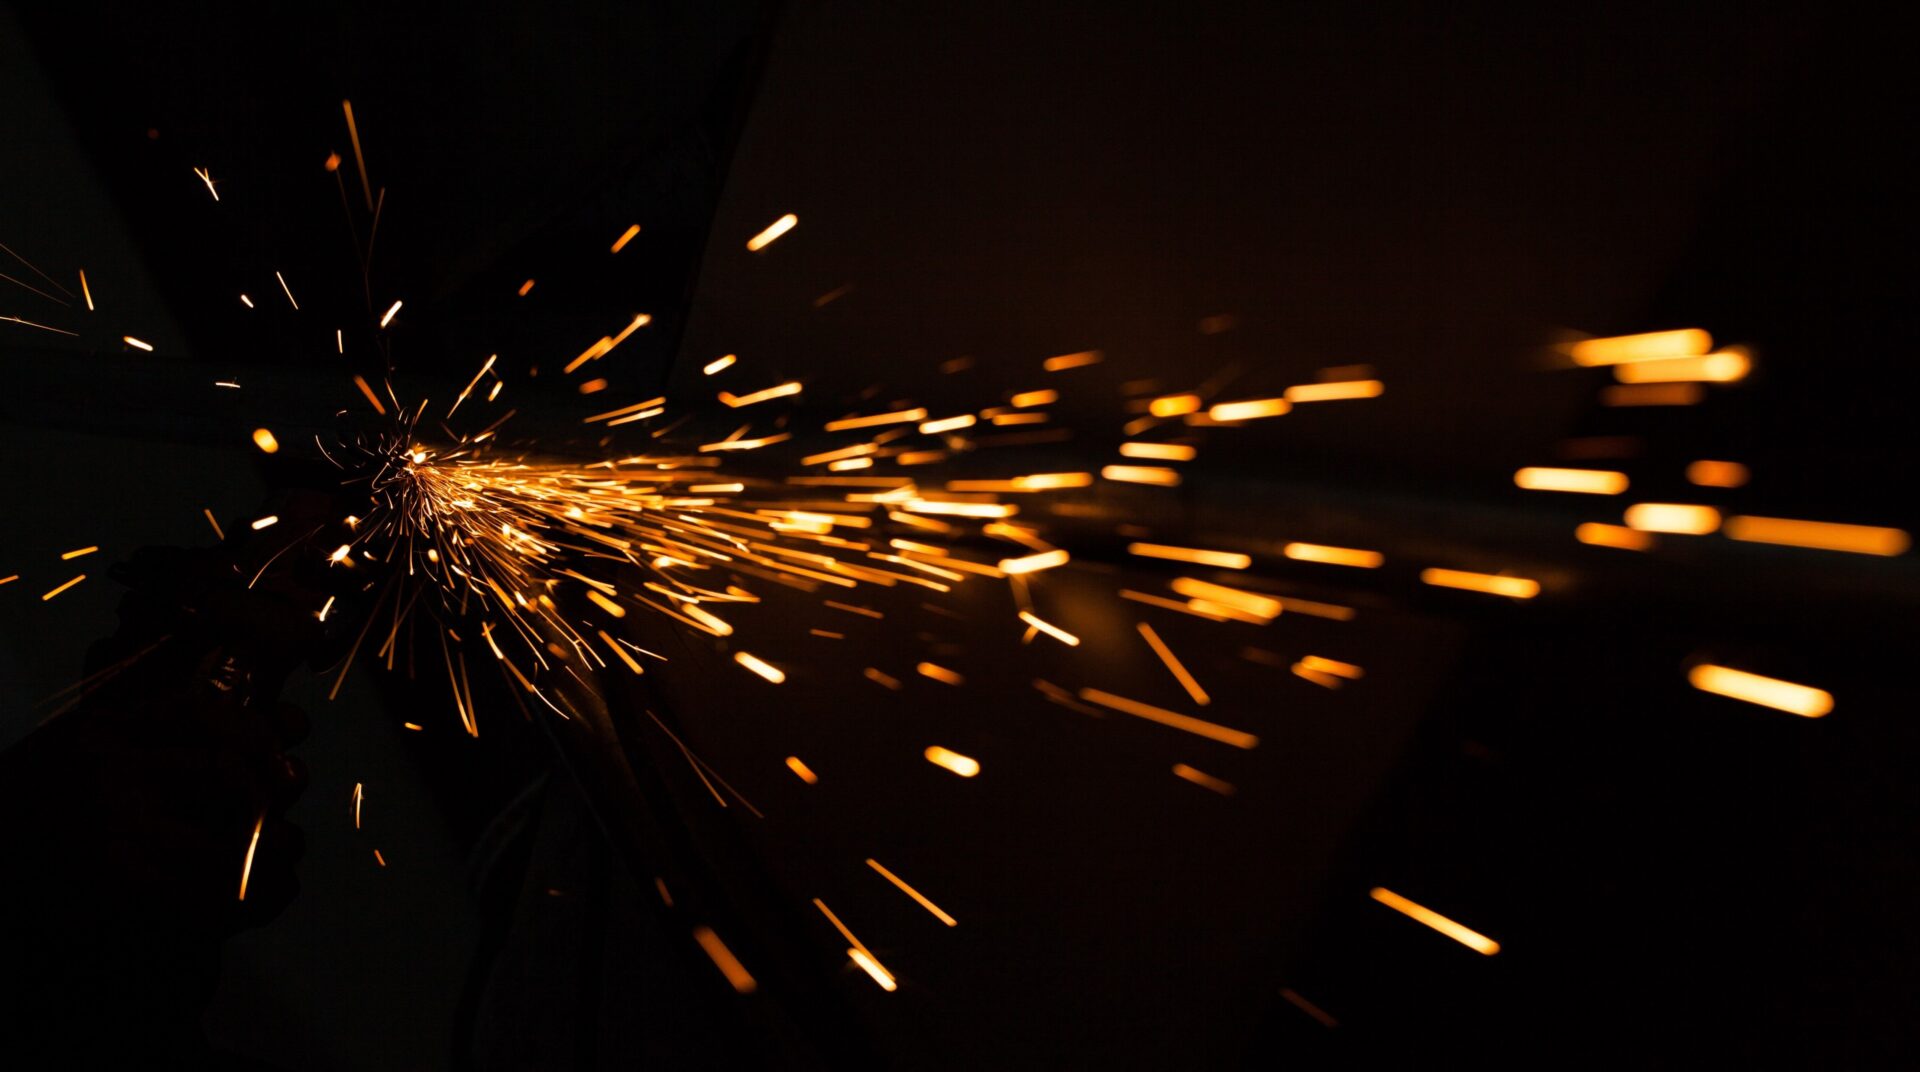 A close up of sparks flying from the side